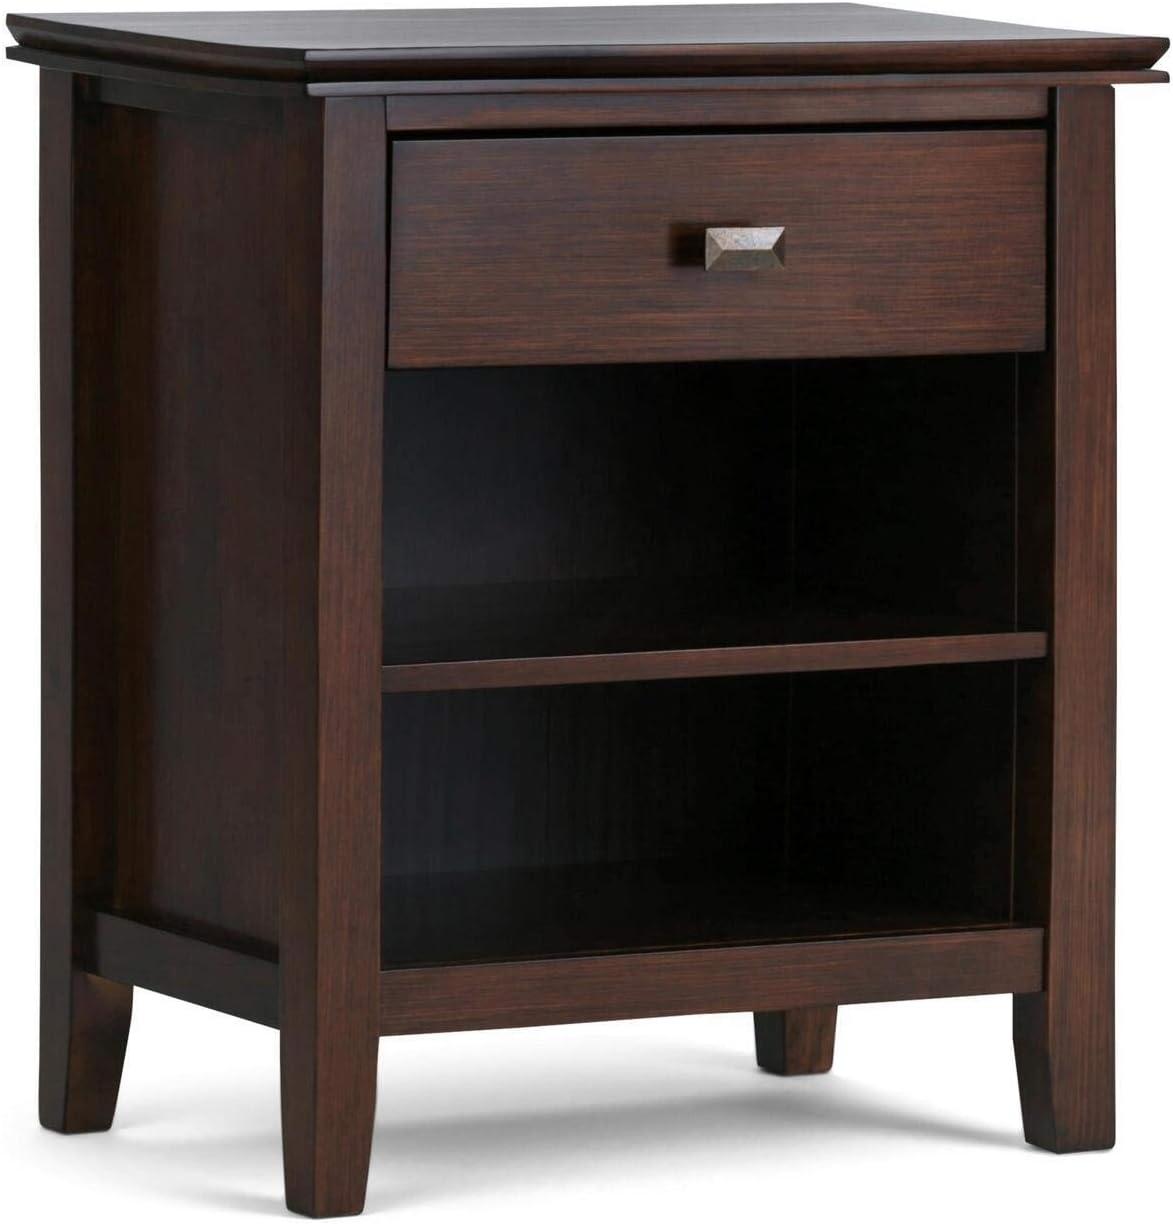 Russet Brown Solid Wood 24" Bedside Nightstand with 1 Drawer